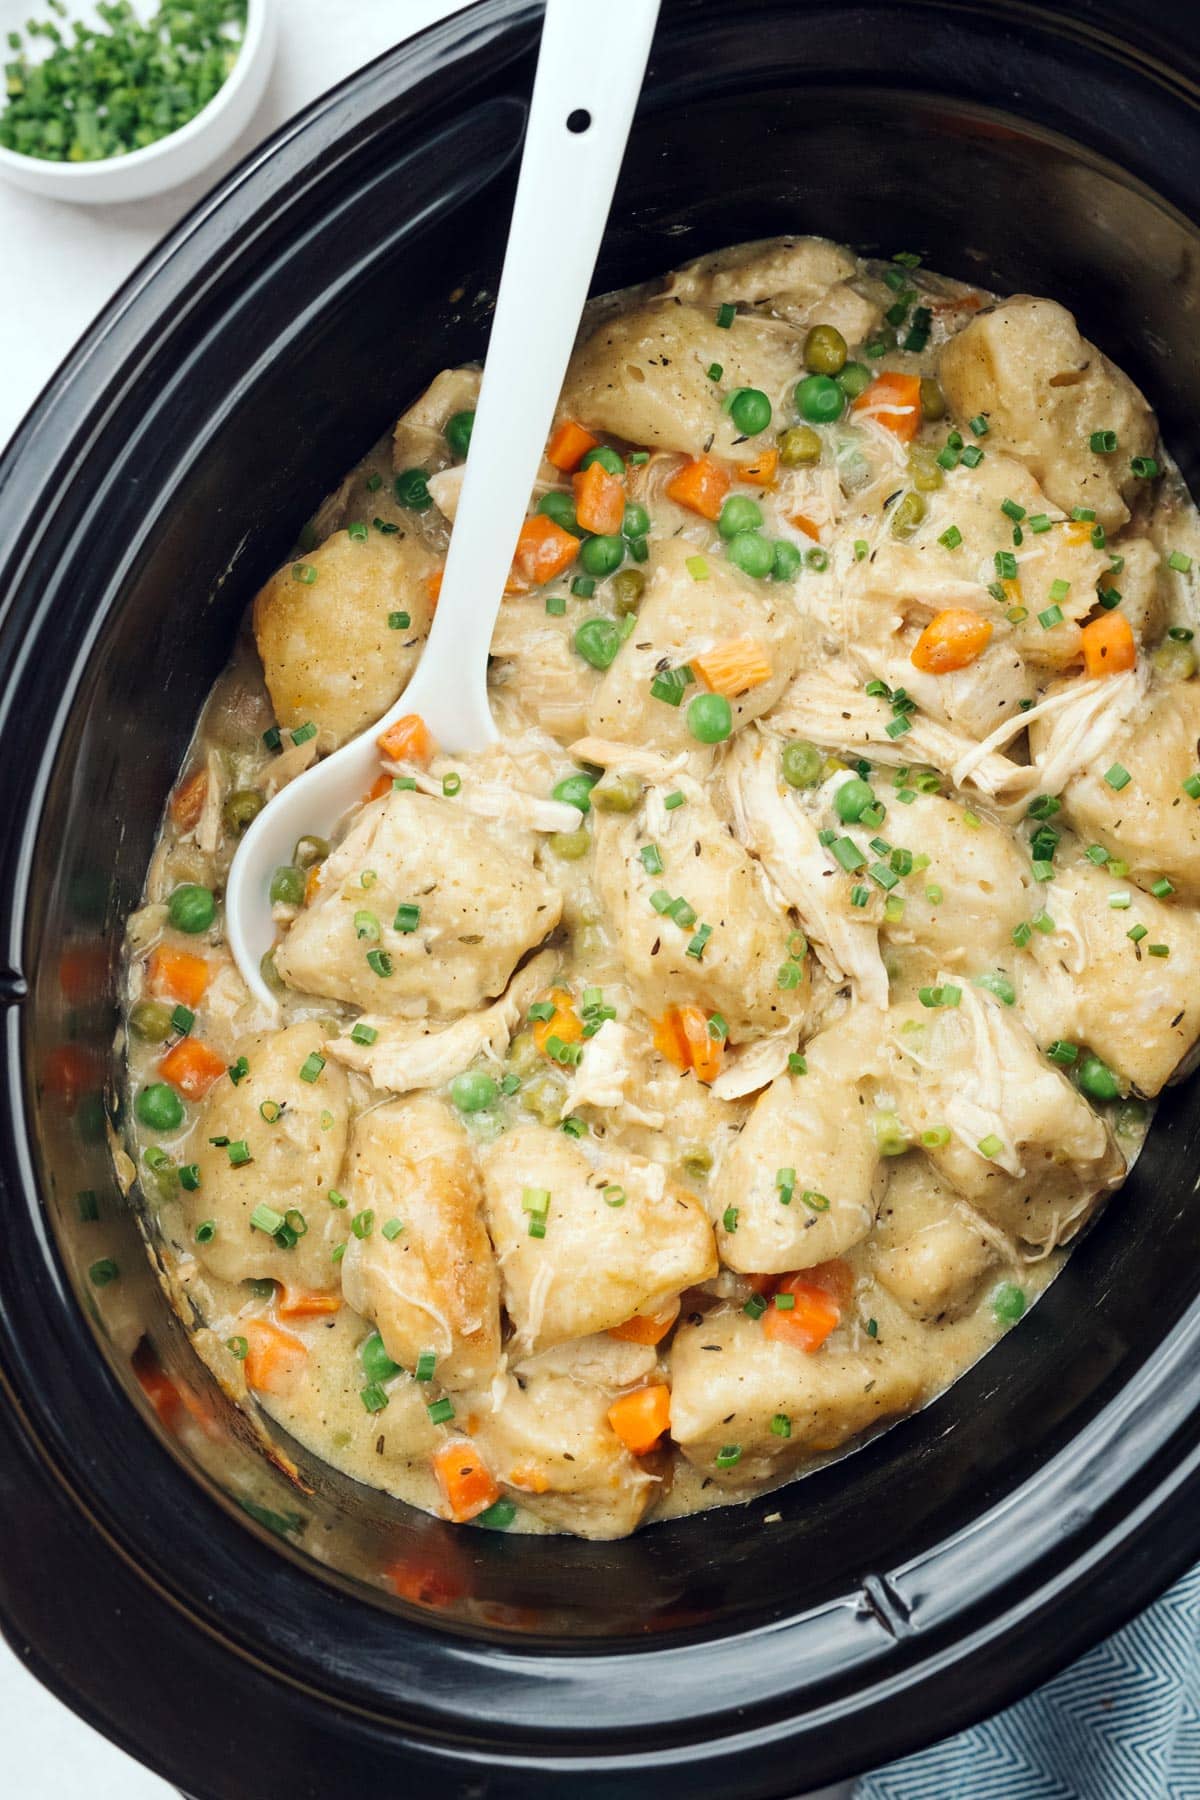 Cooked crockpot chicken and dumplings in a slow cooker.